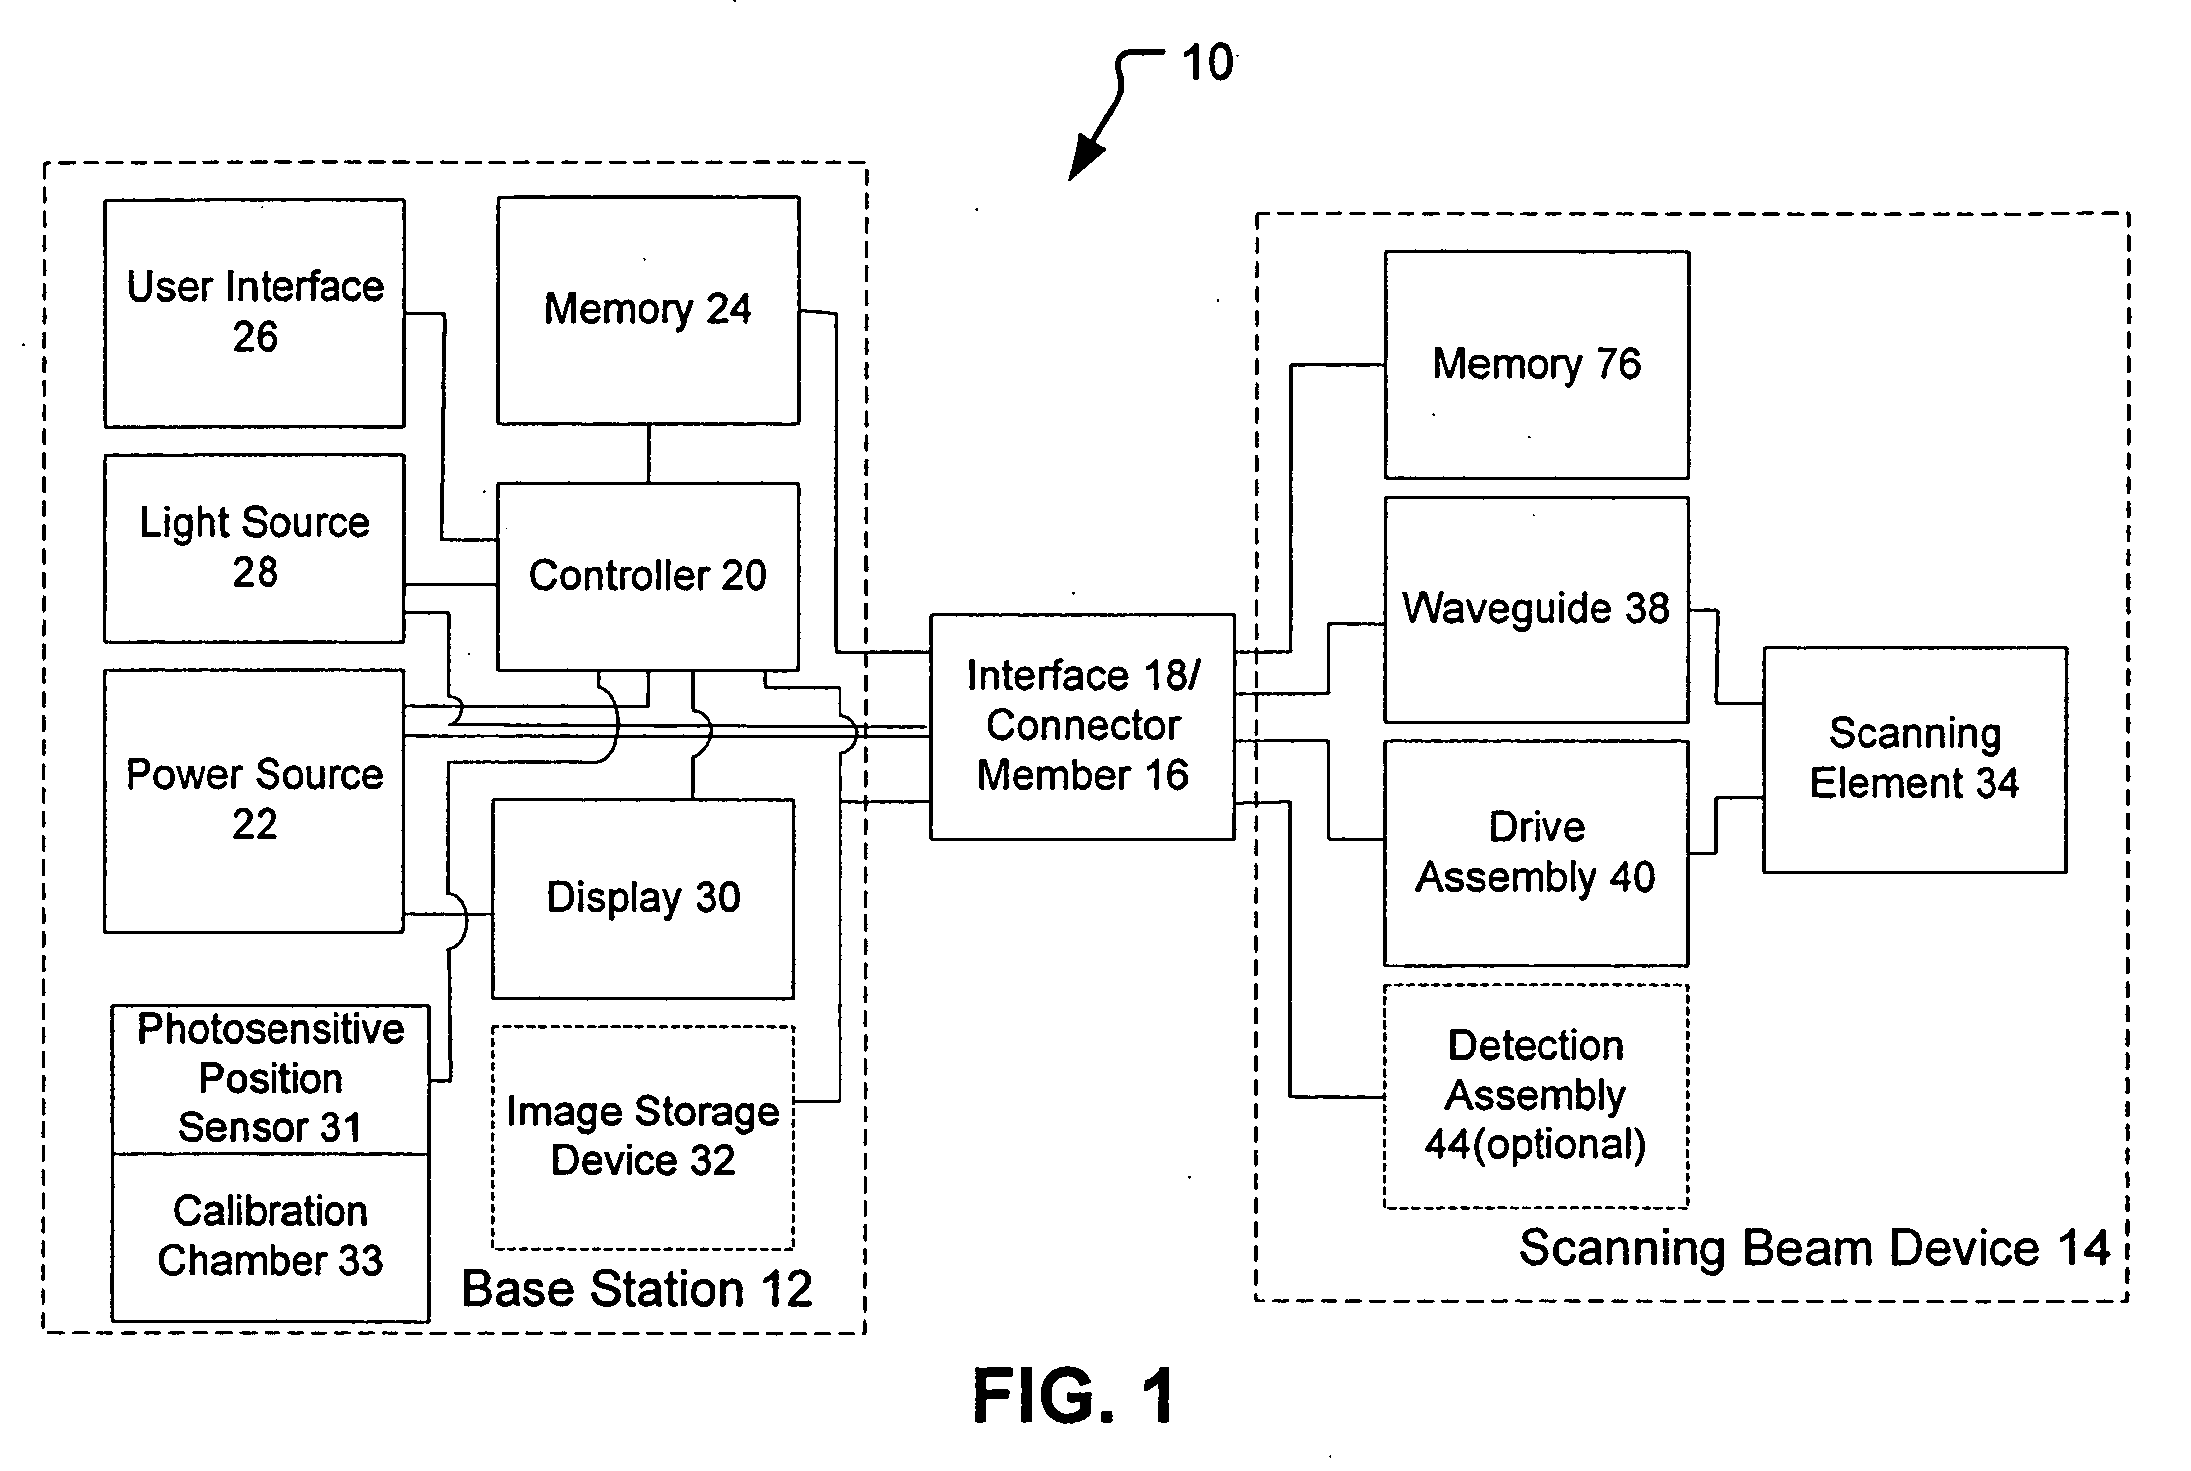 Configuration memory for a scanning beam device